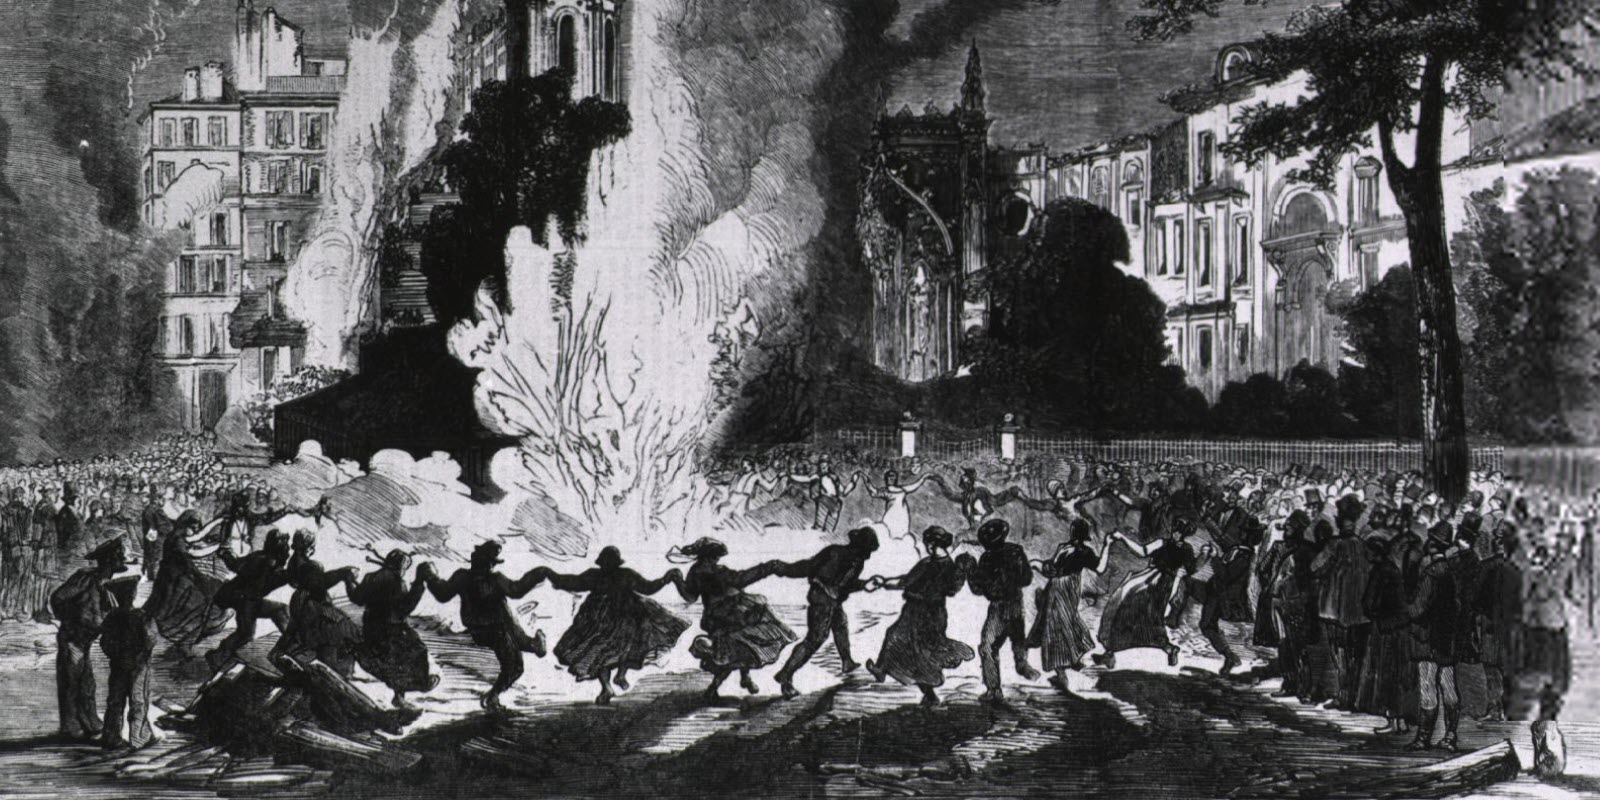 Cholera at Marseilles. Fires lighted...to destroy the pestilence. Crowds watch; a large group dance around the fire.